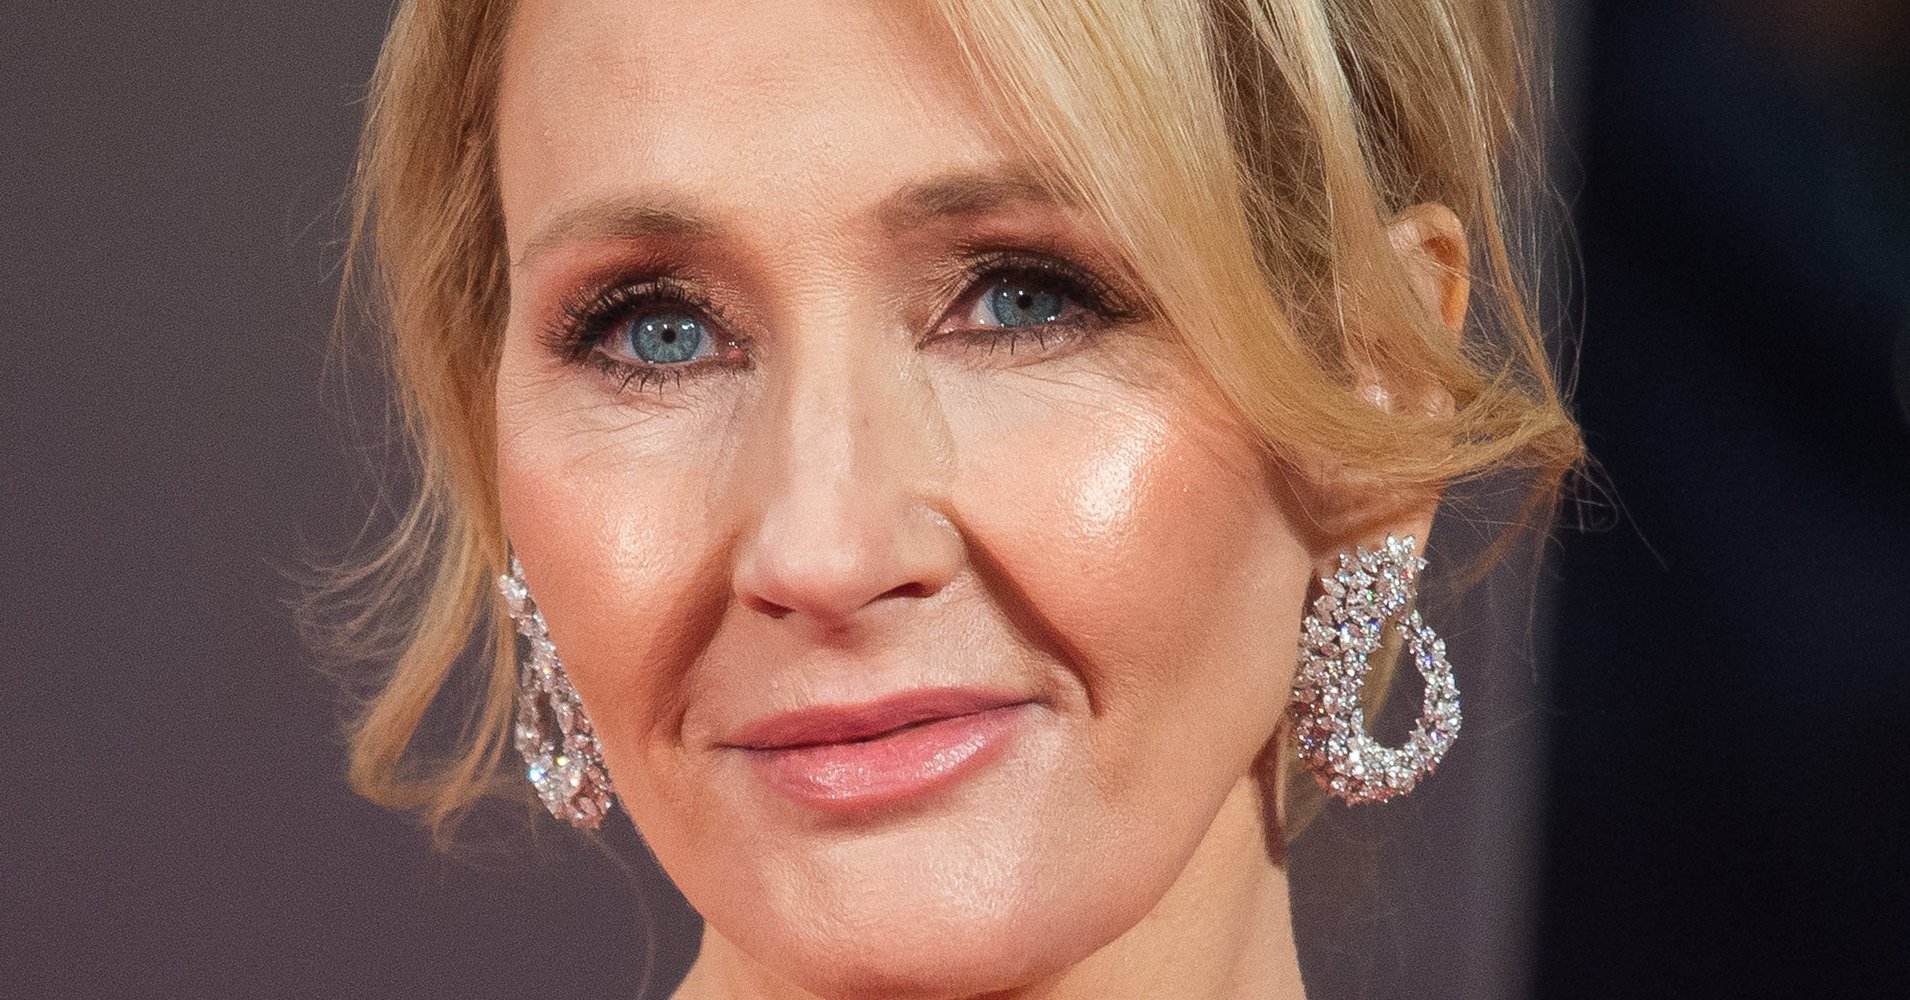 Fans wish J.K. Rowling a happy birthday and thank her for the magic  